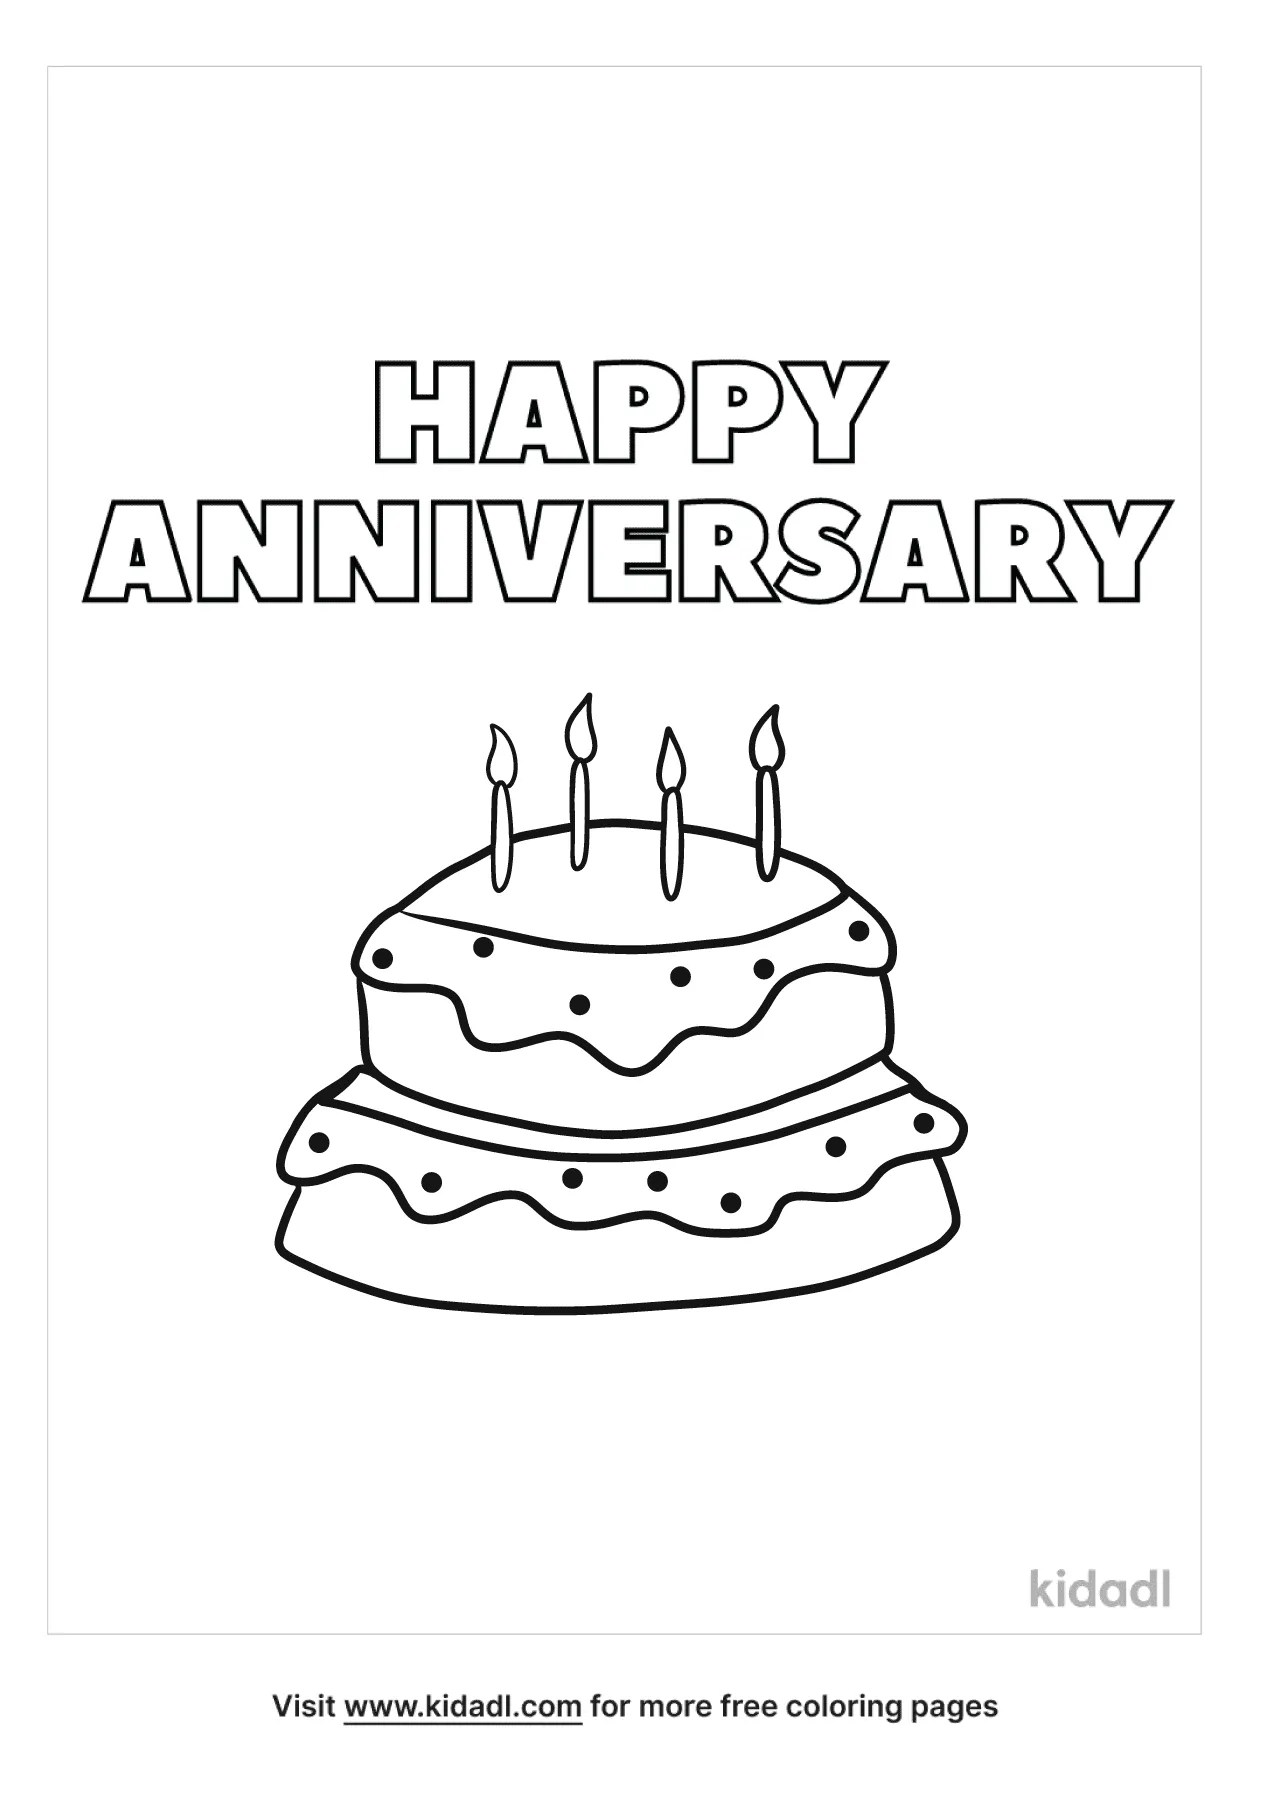 free-happy-anniversary-coloring-page-coloring-page-printables-kidadl